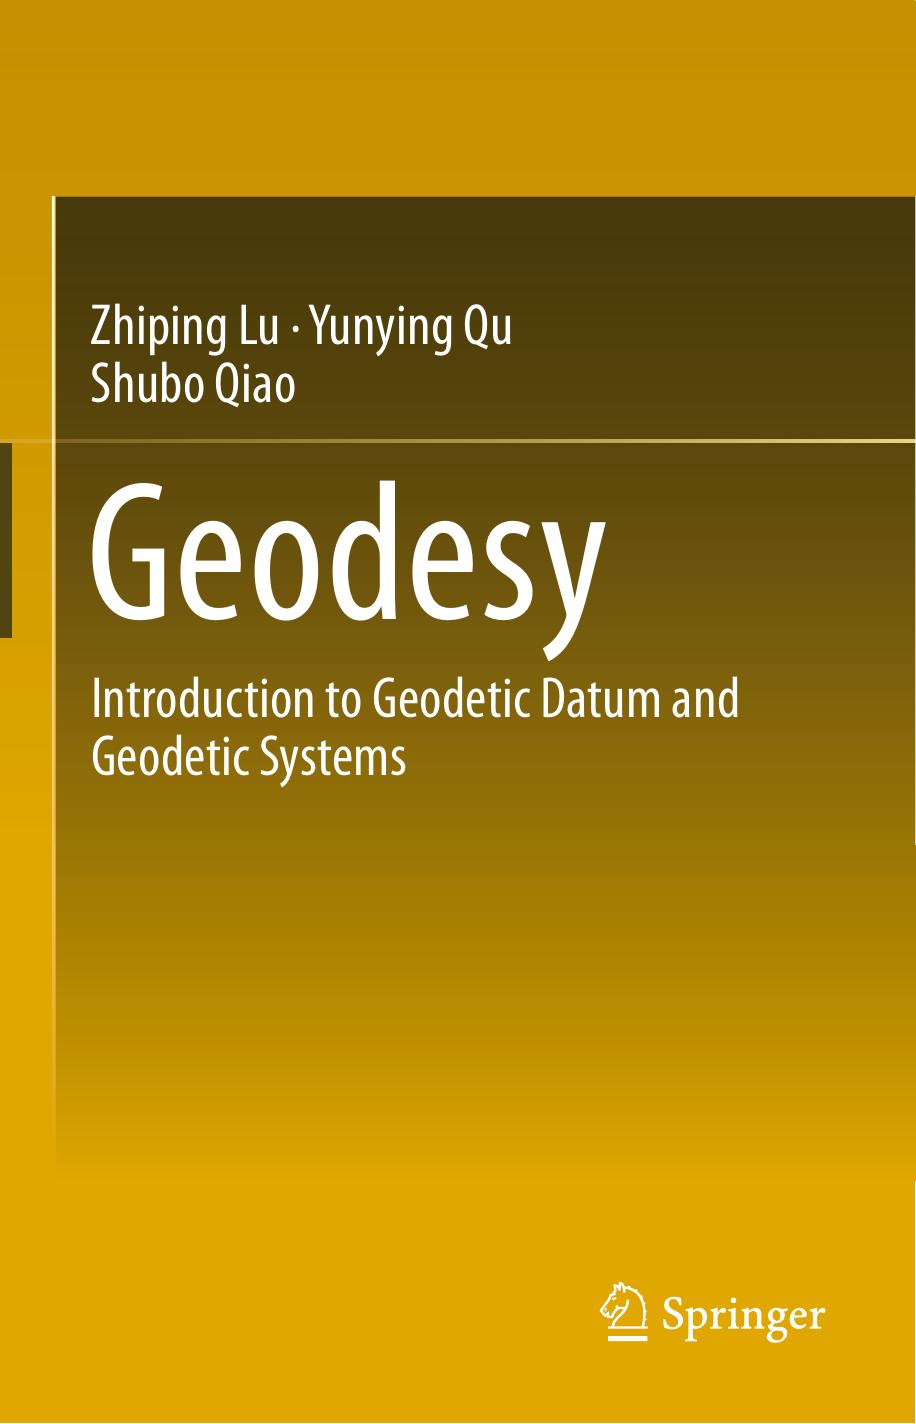 Geodesy  Introduction to Geodetic Datum and Geodetic Systems 2018